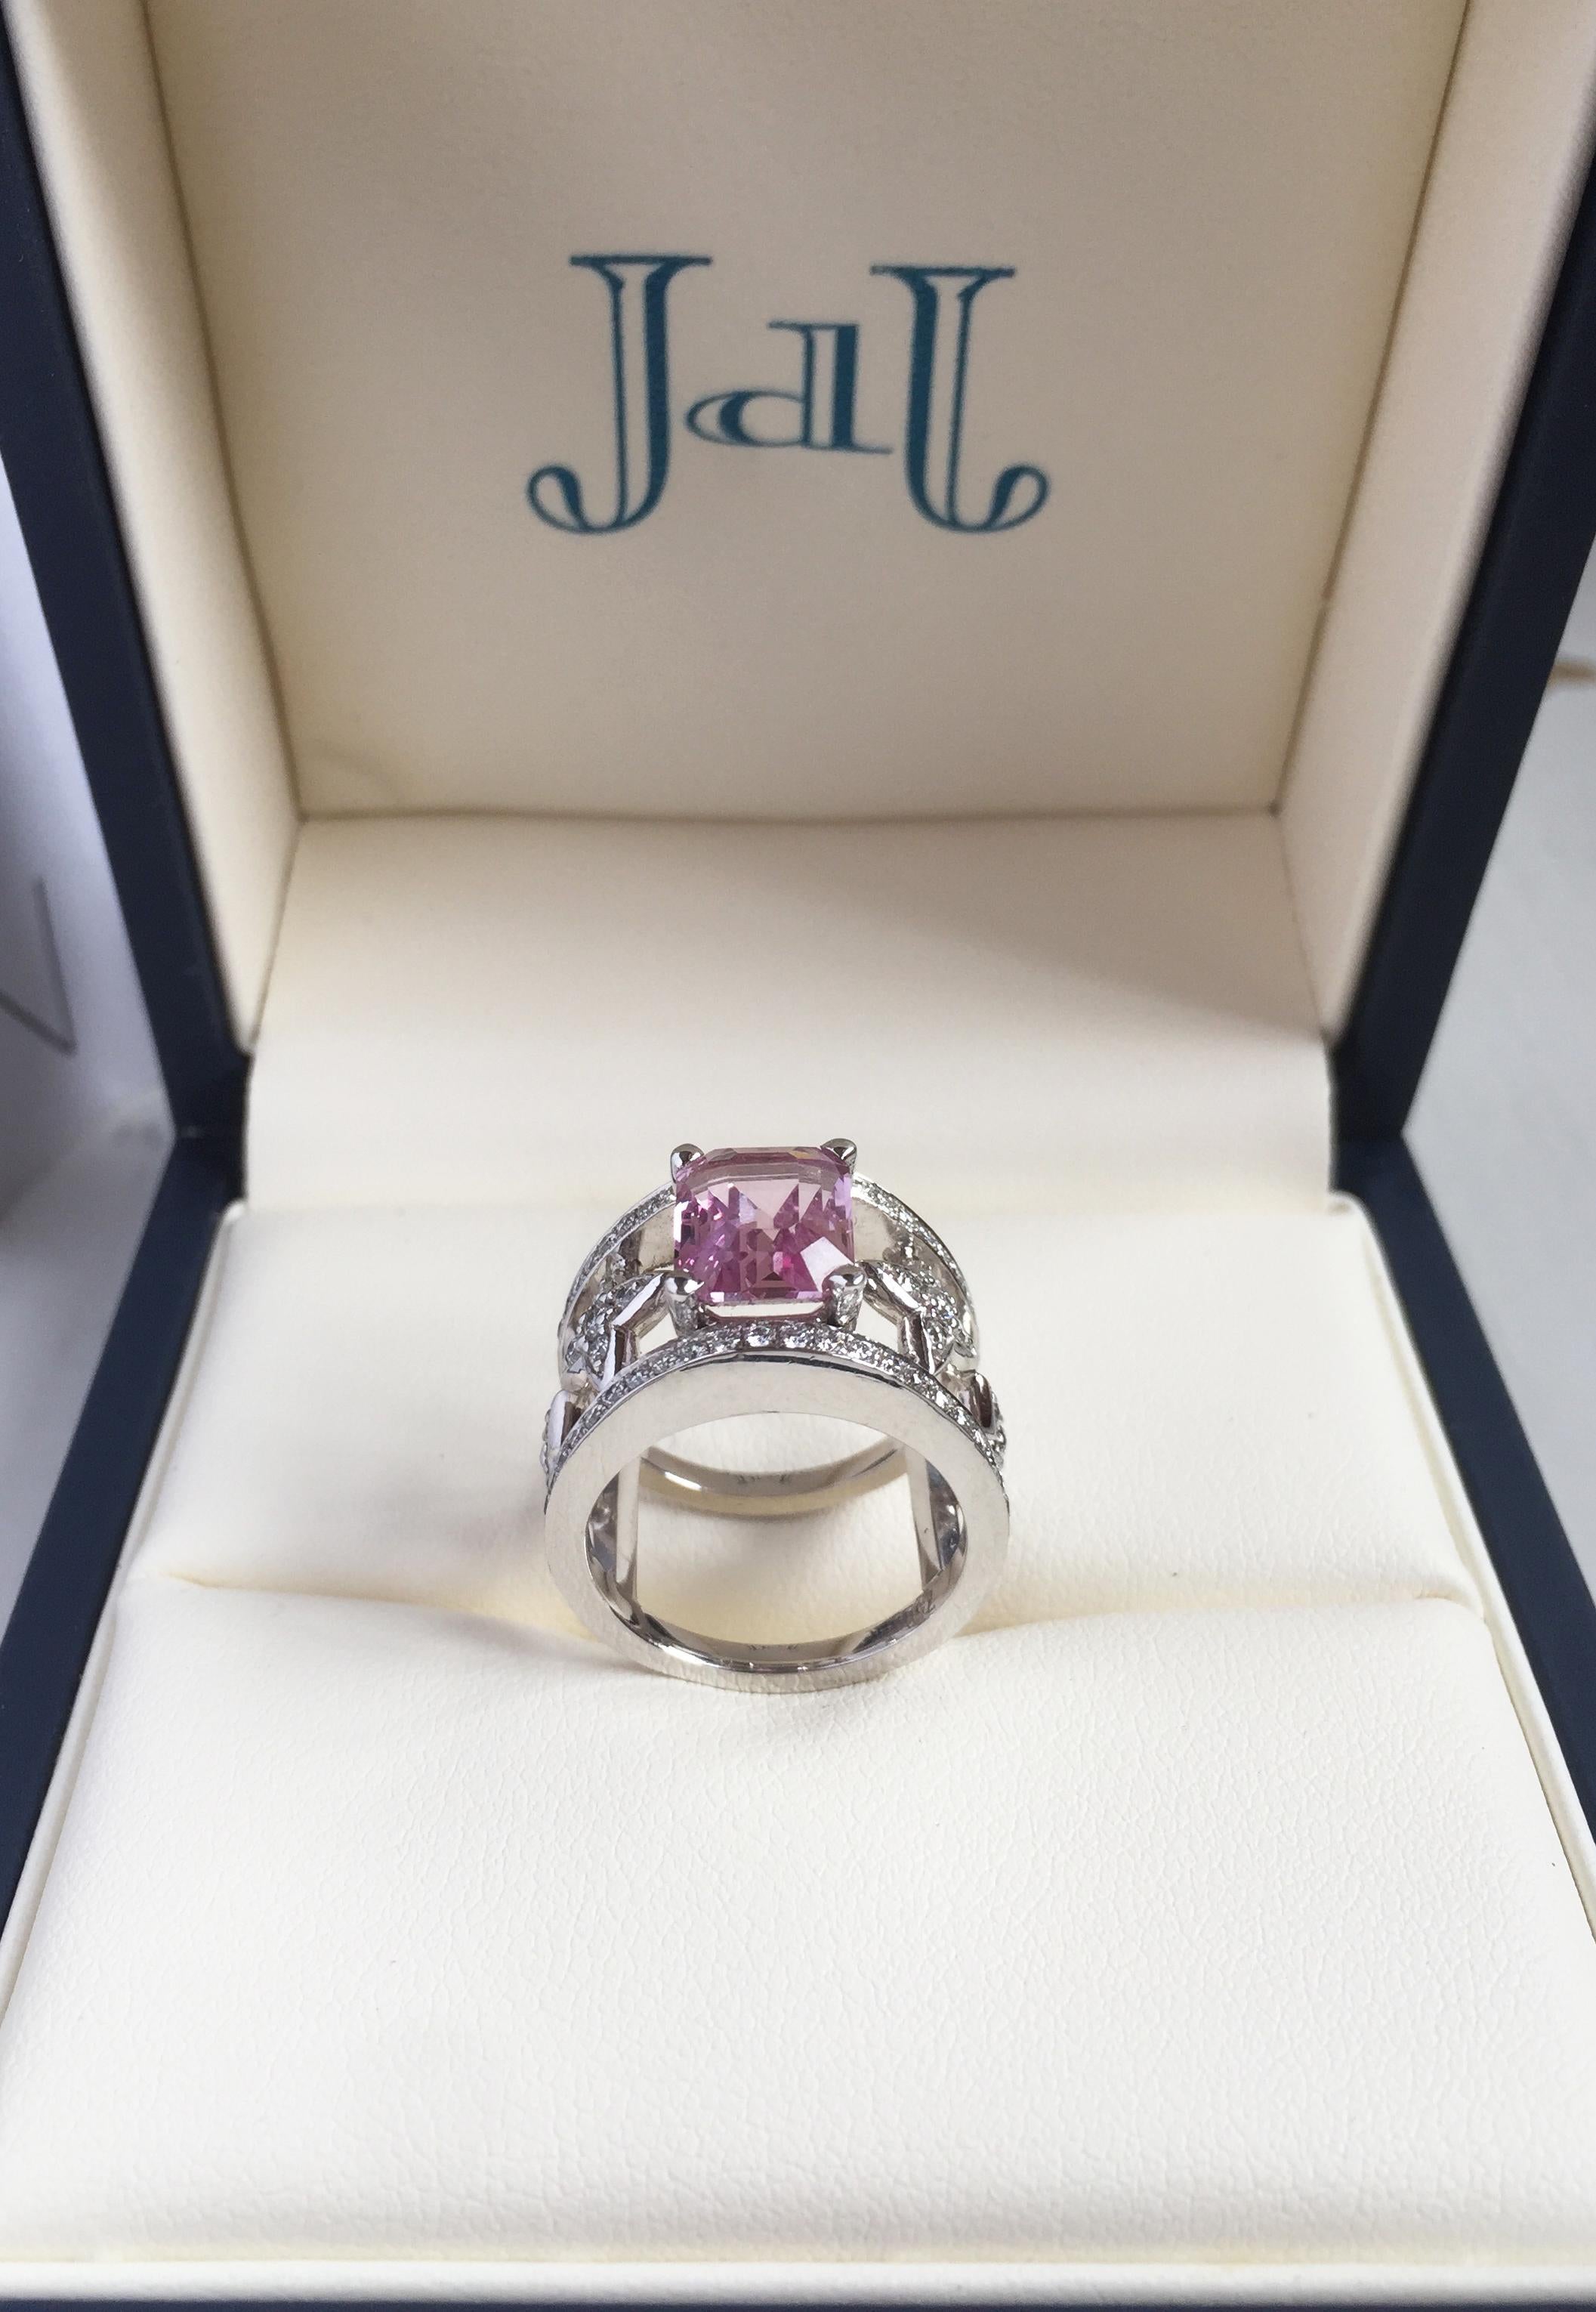 JdJ Couture Emerald Cut Pink Sapphire and Diamond Ring in 18 Karat White Gold 5